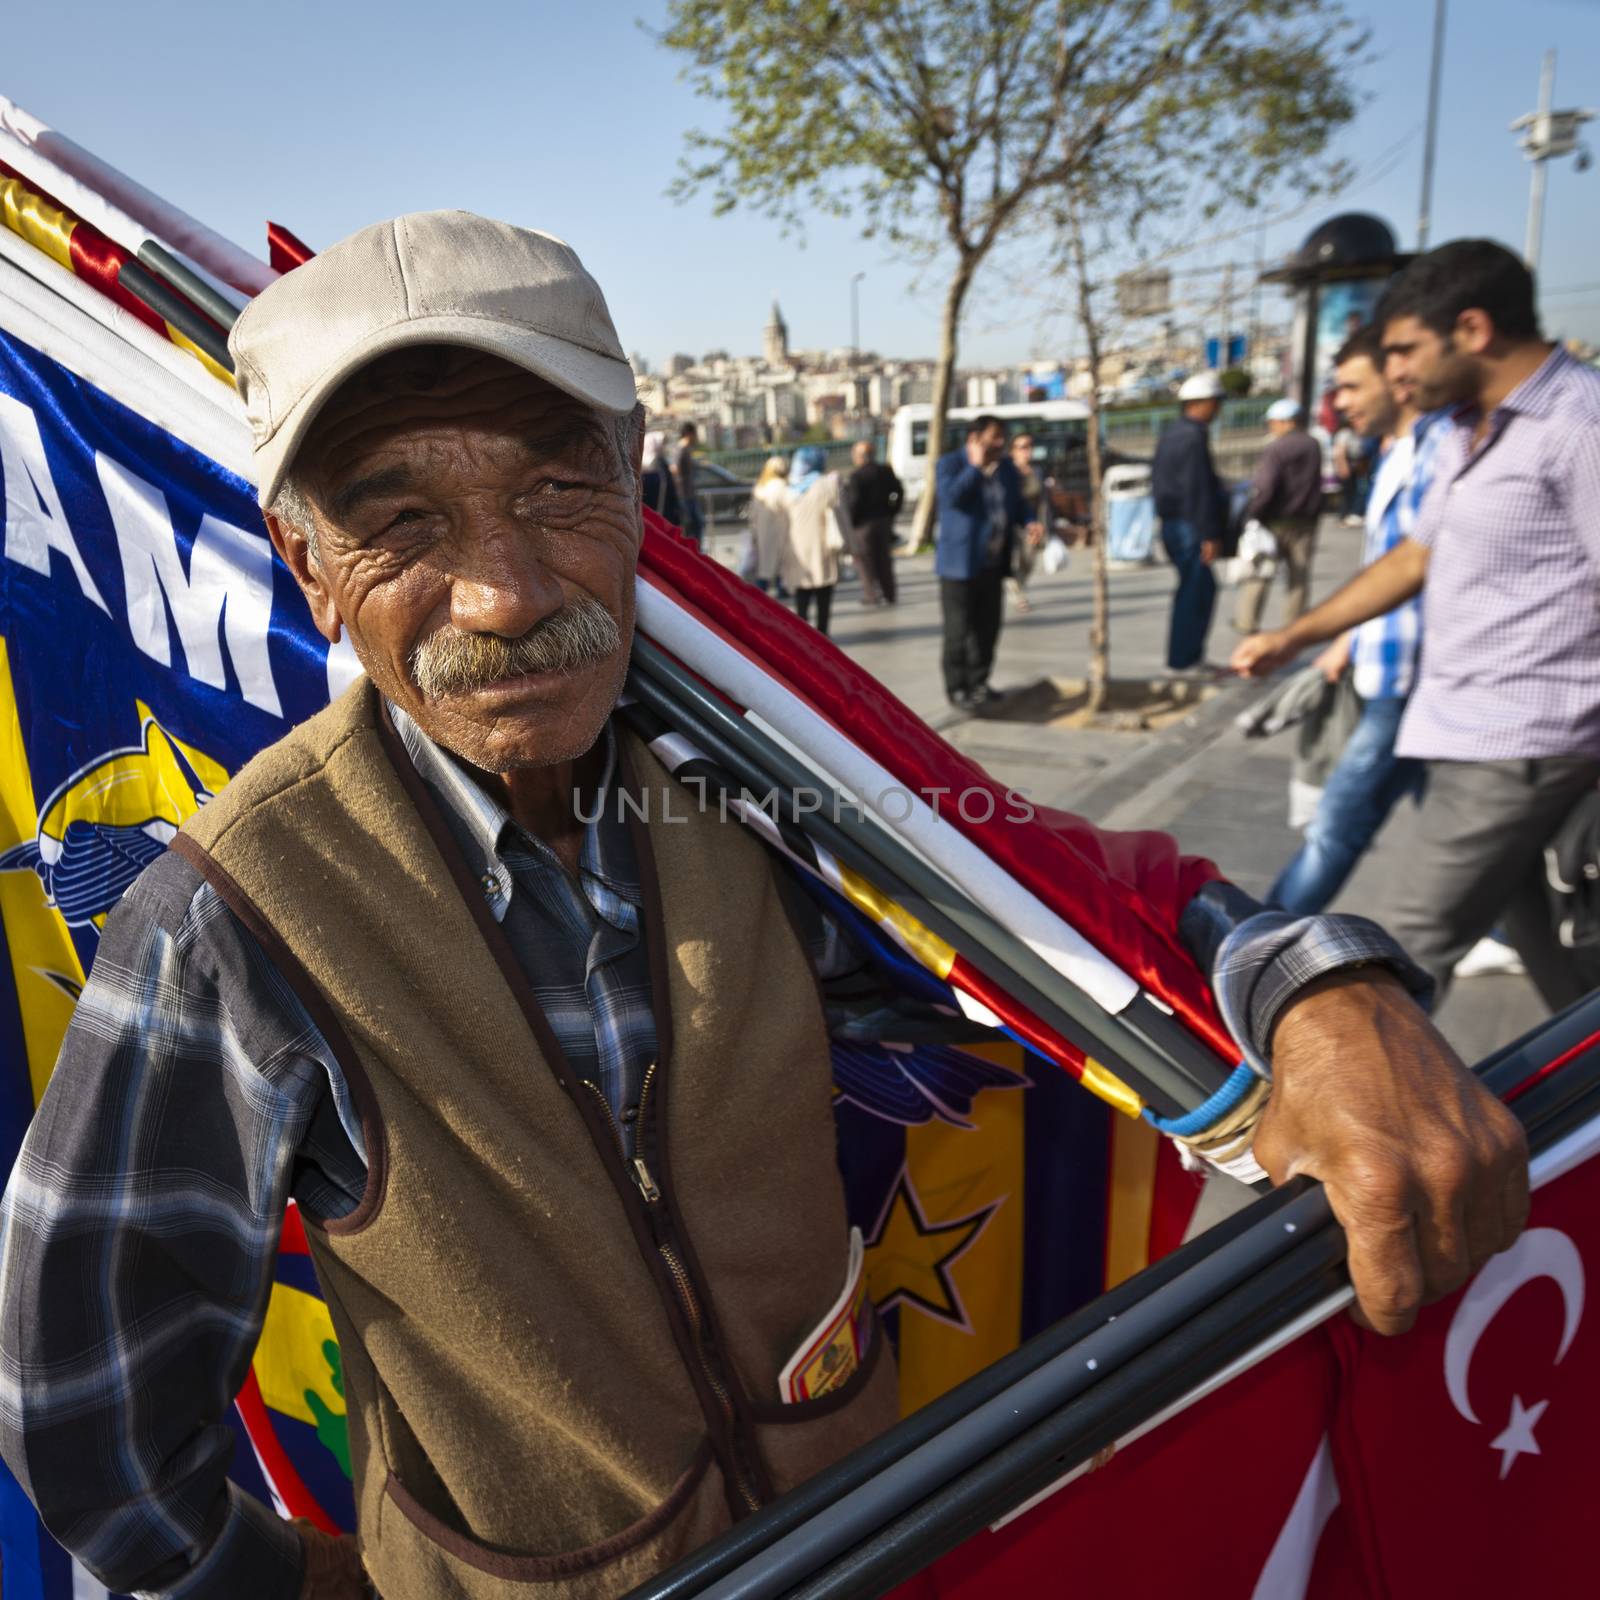 Man Selling Flags Near Istanbul Spice Market by Creatista